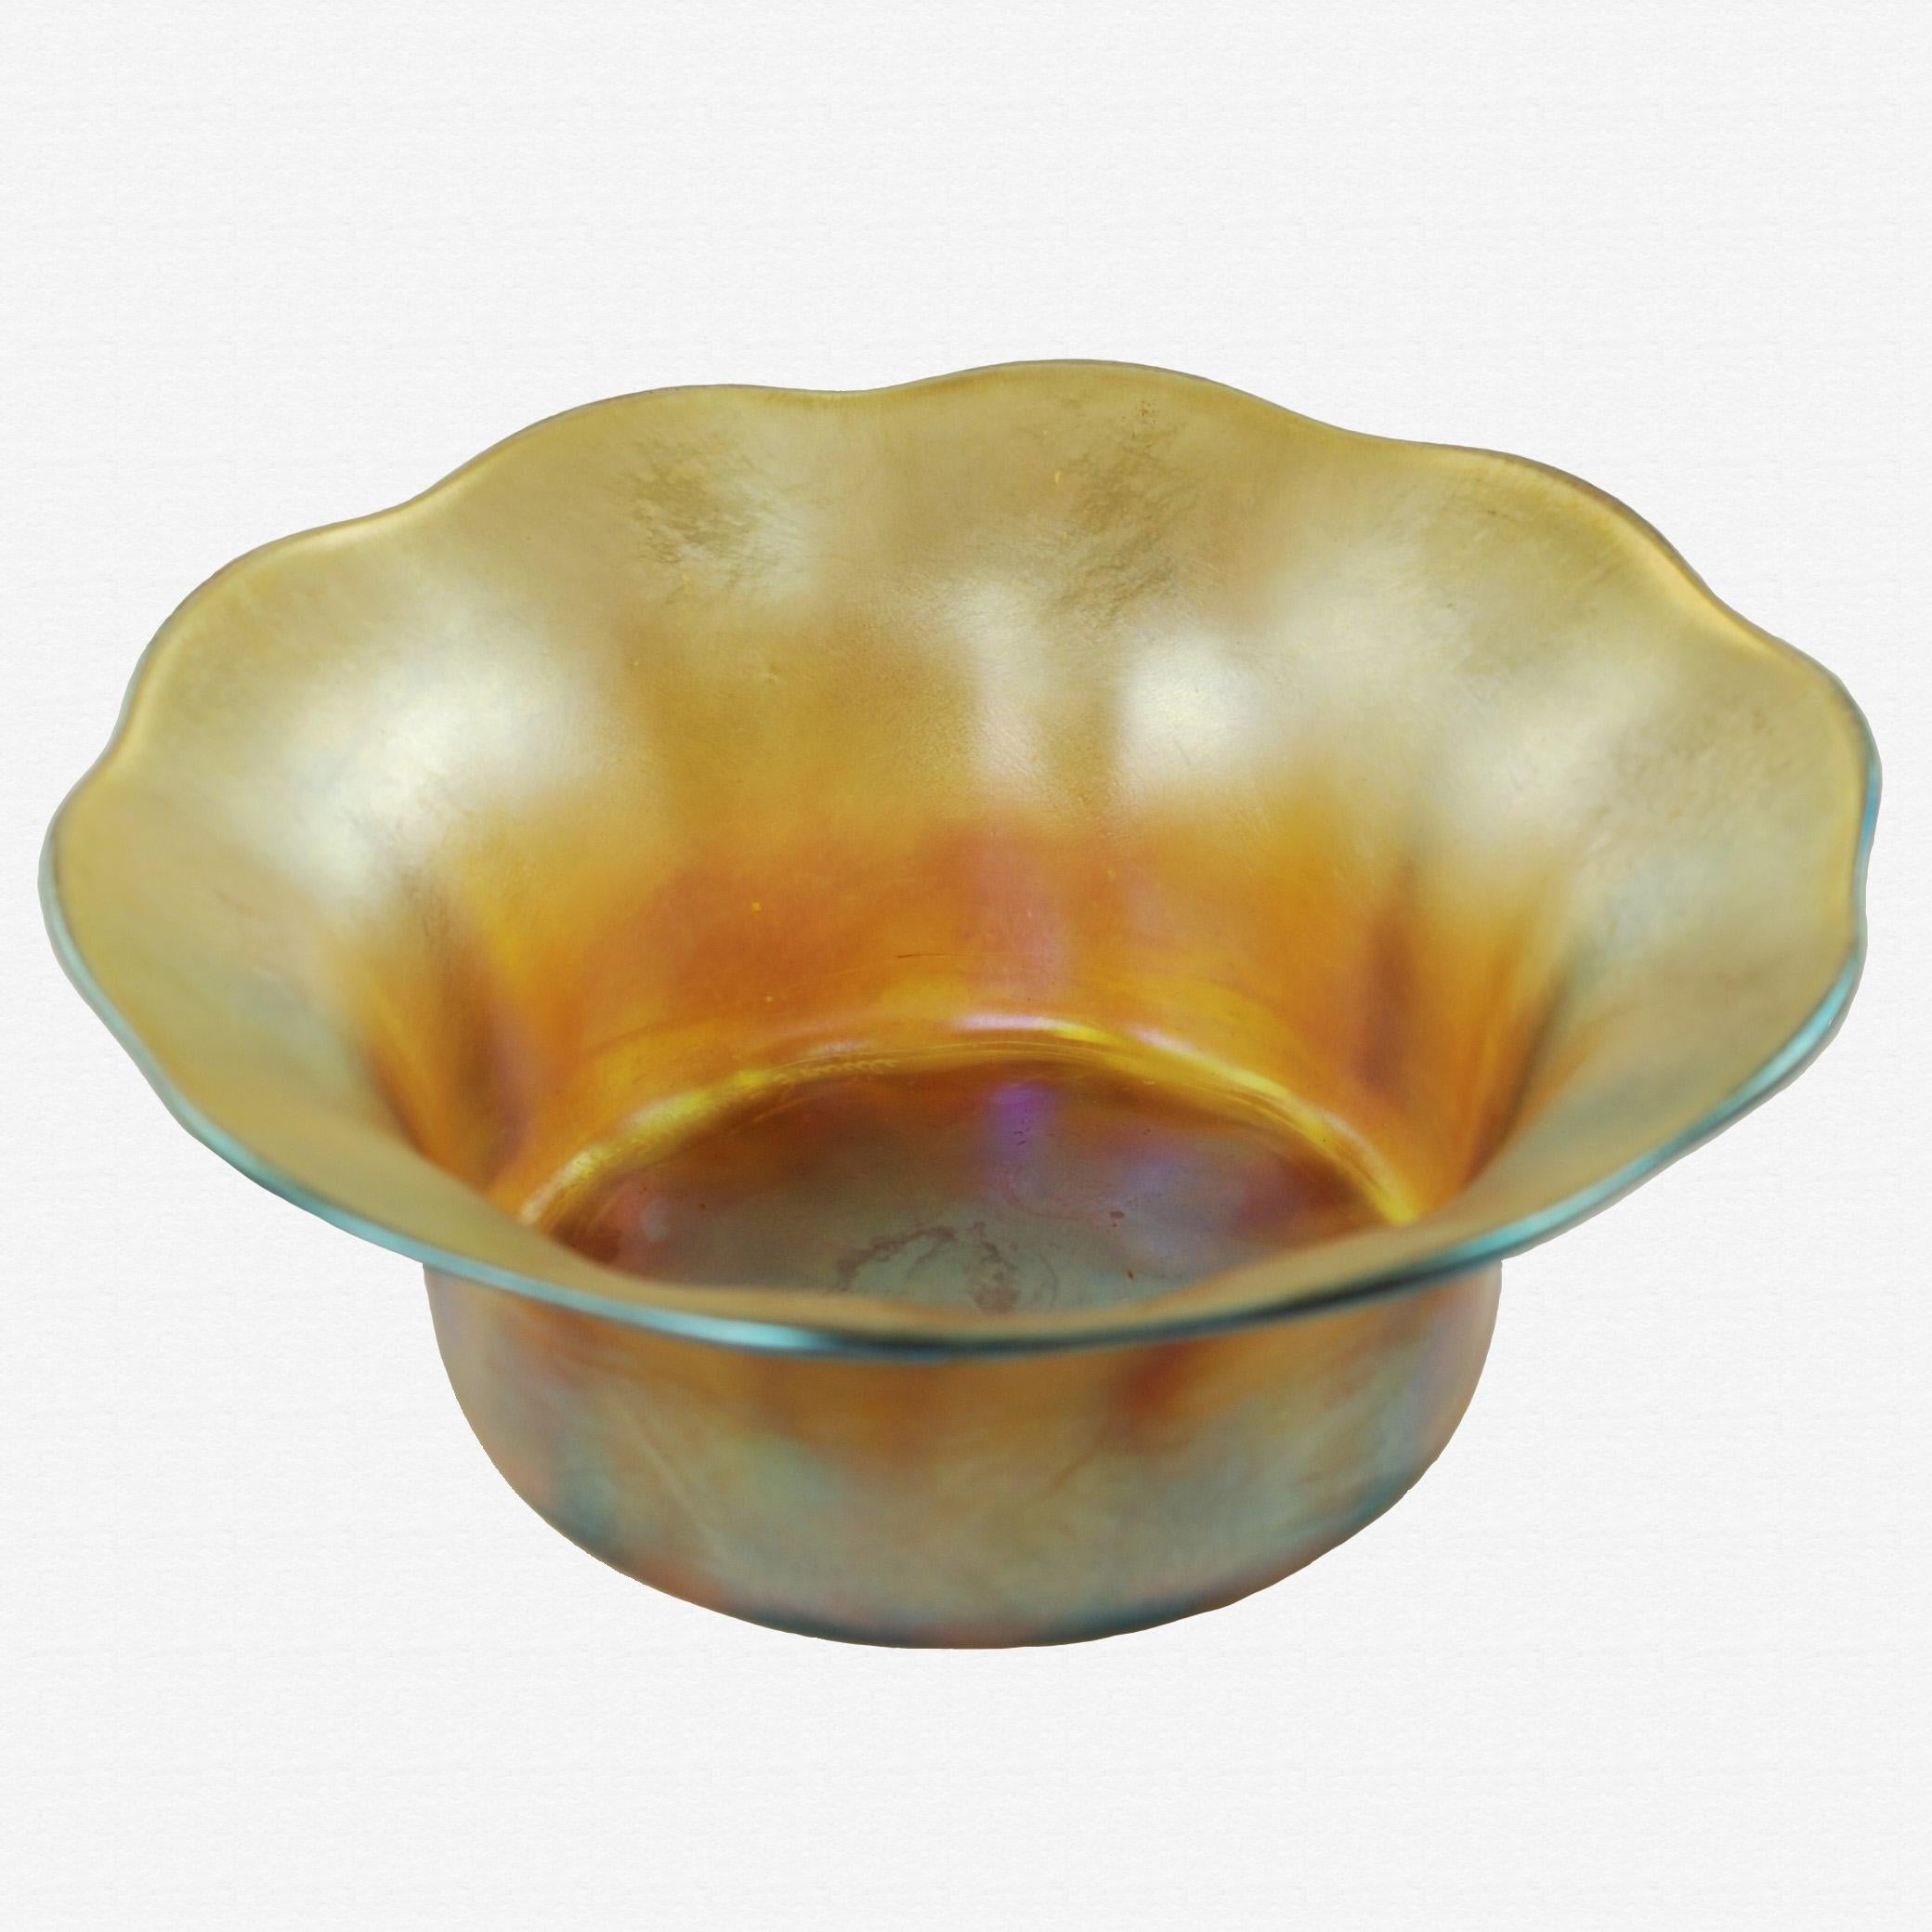 This Tiffany iridescent gold Favrile glass five-piece set includes a fruit bowl and four individual serving bowls. The matched set has cylindrical bodies with flared rims having scalloped edges. The pieces are all signed and numbered, with the large